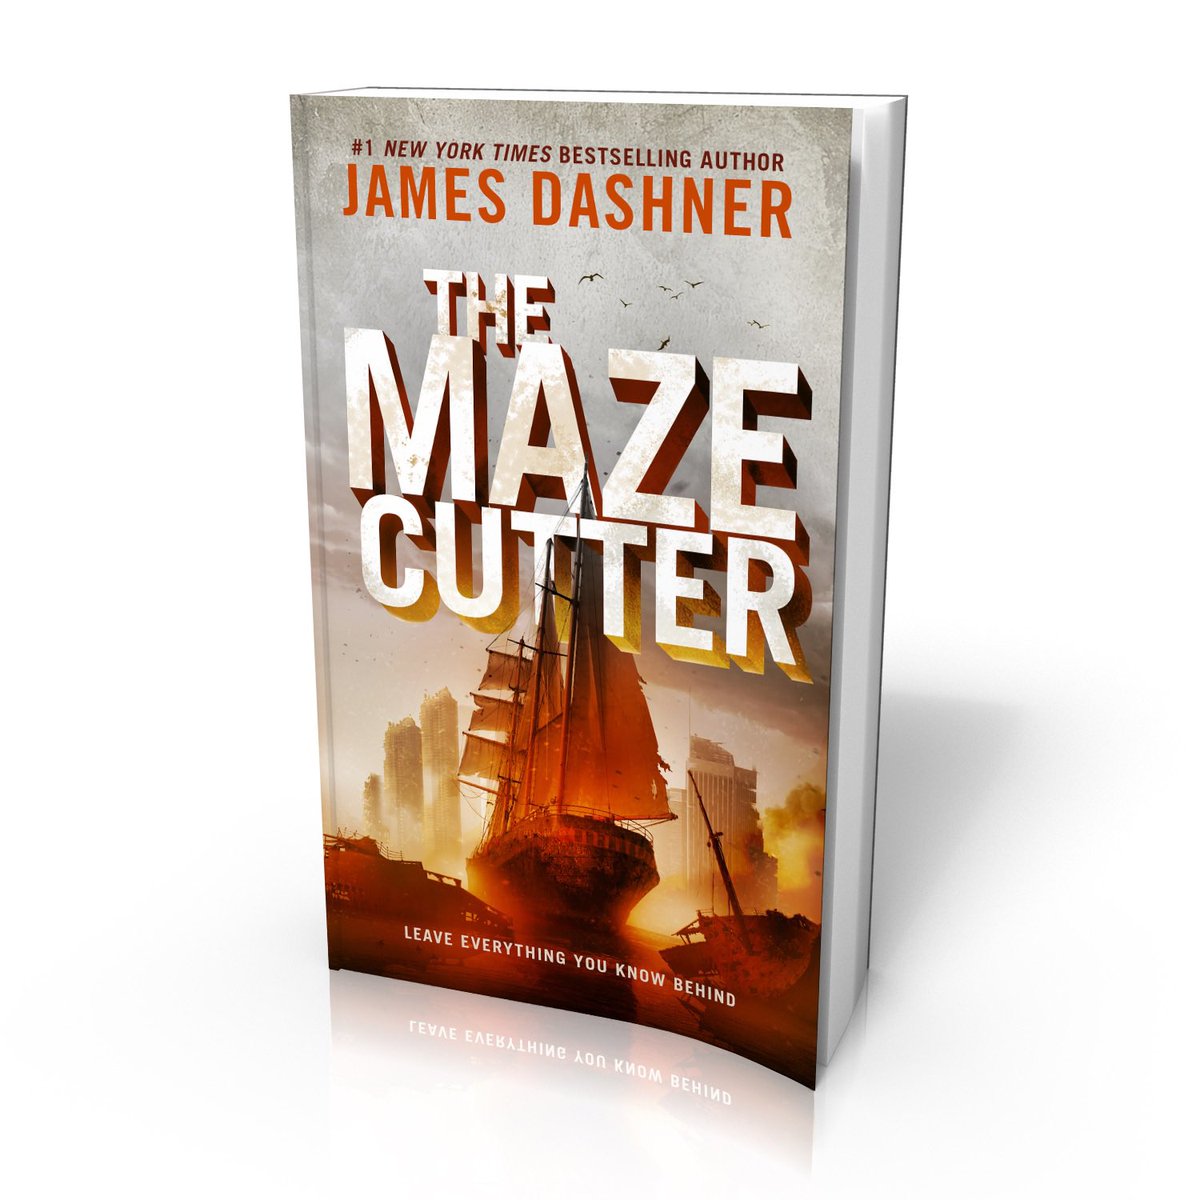 Two days until #TheMazeCutter!